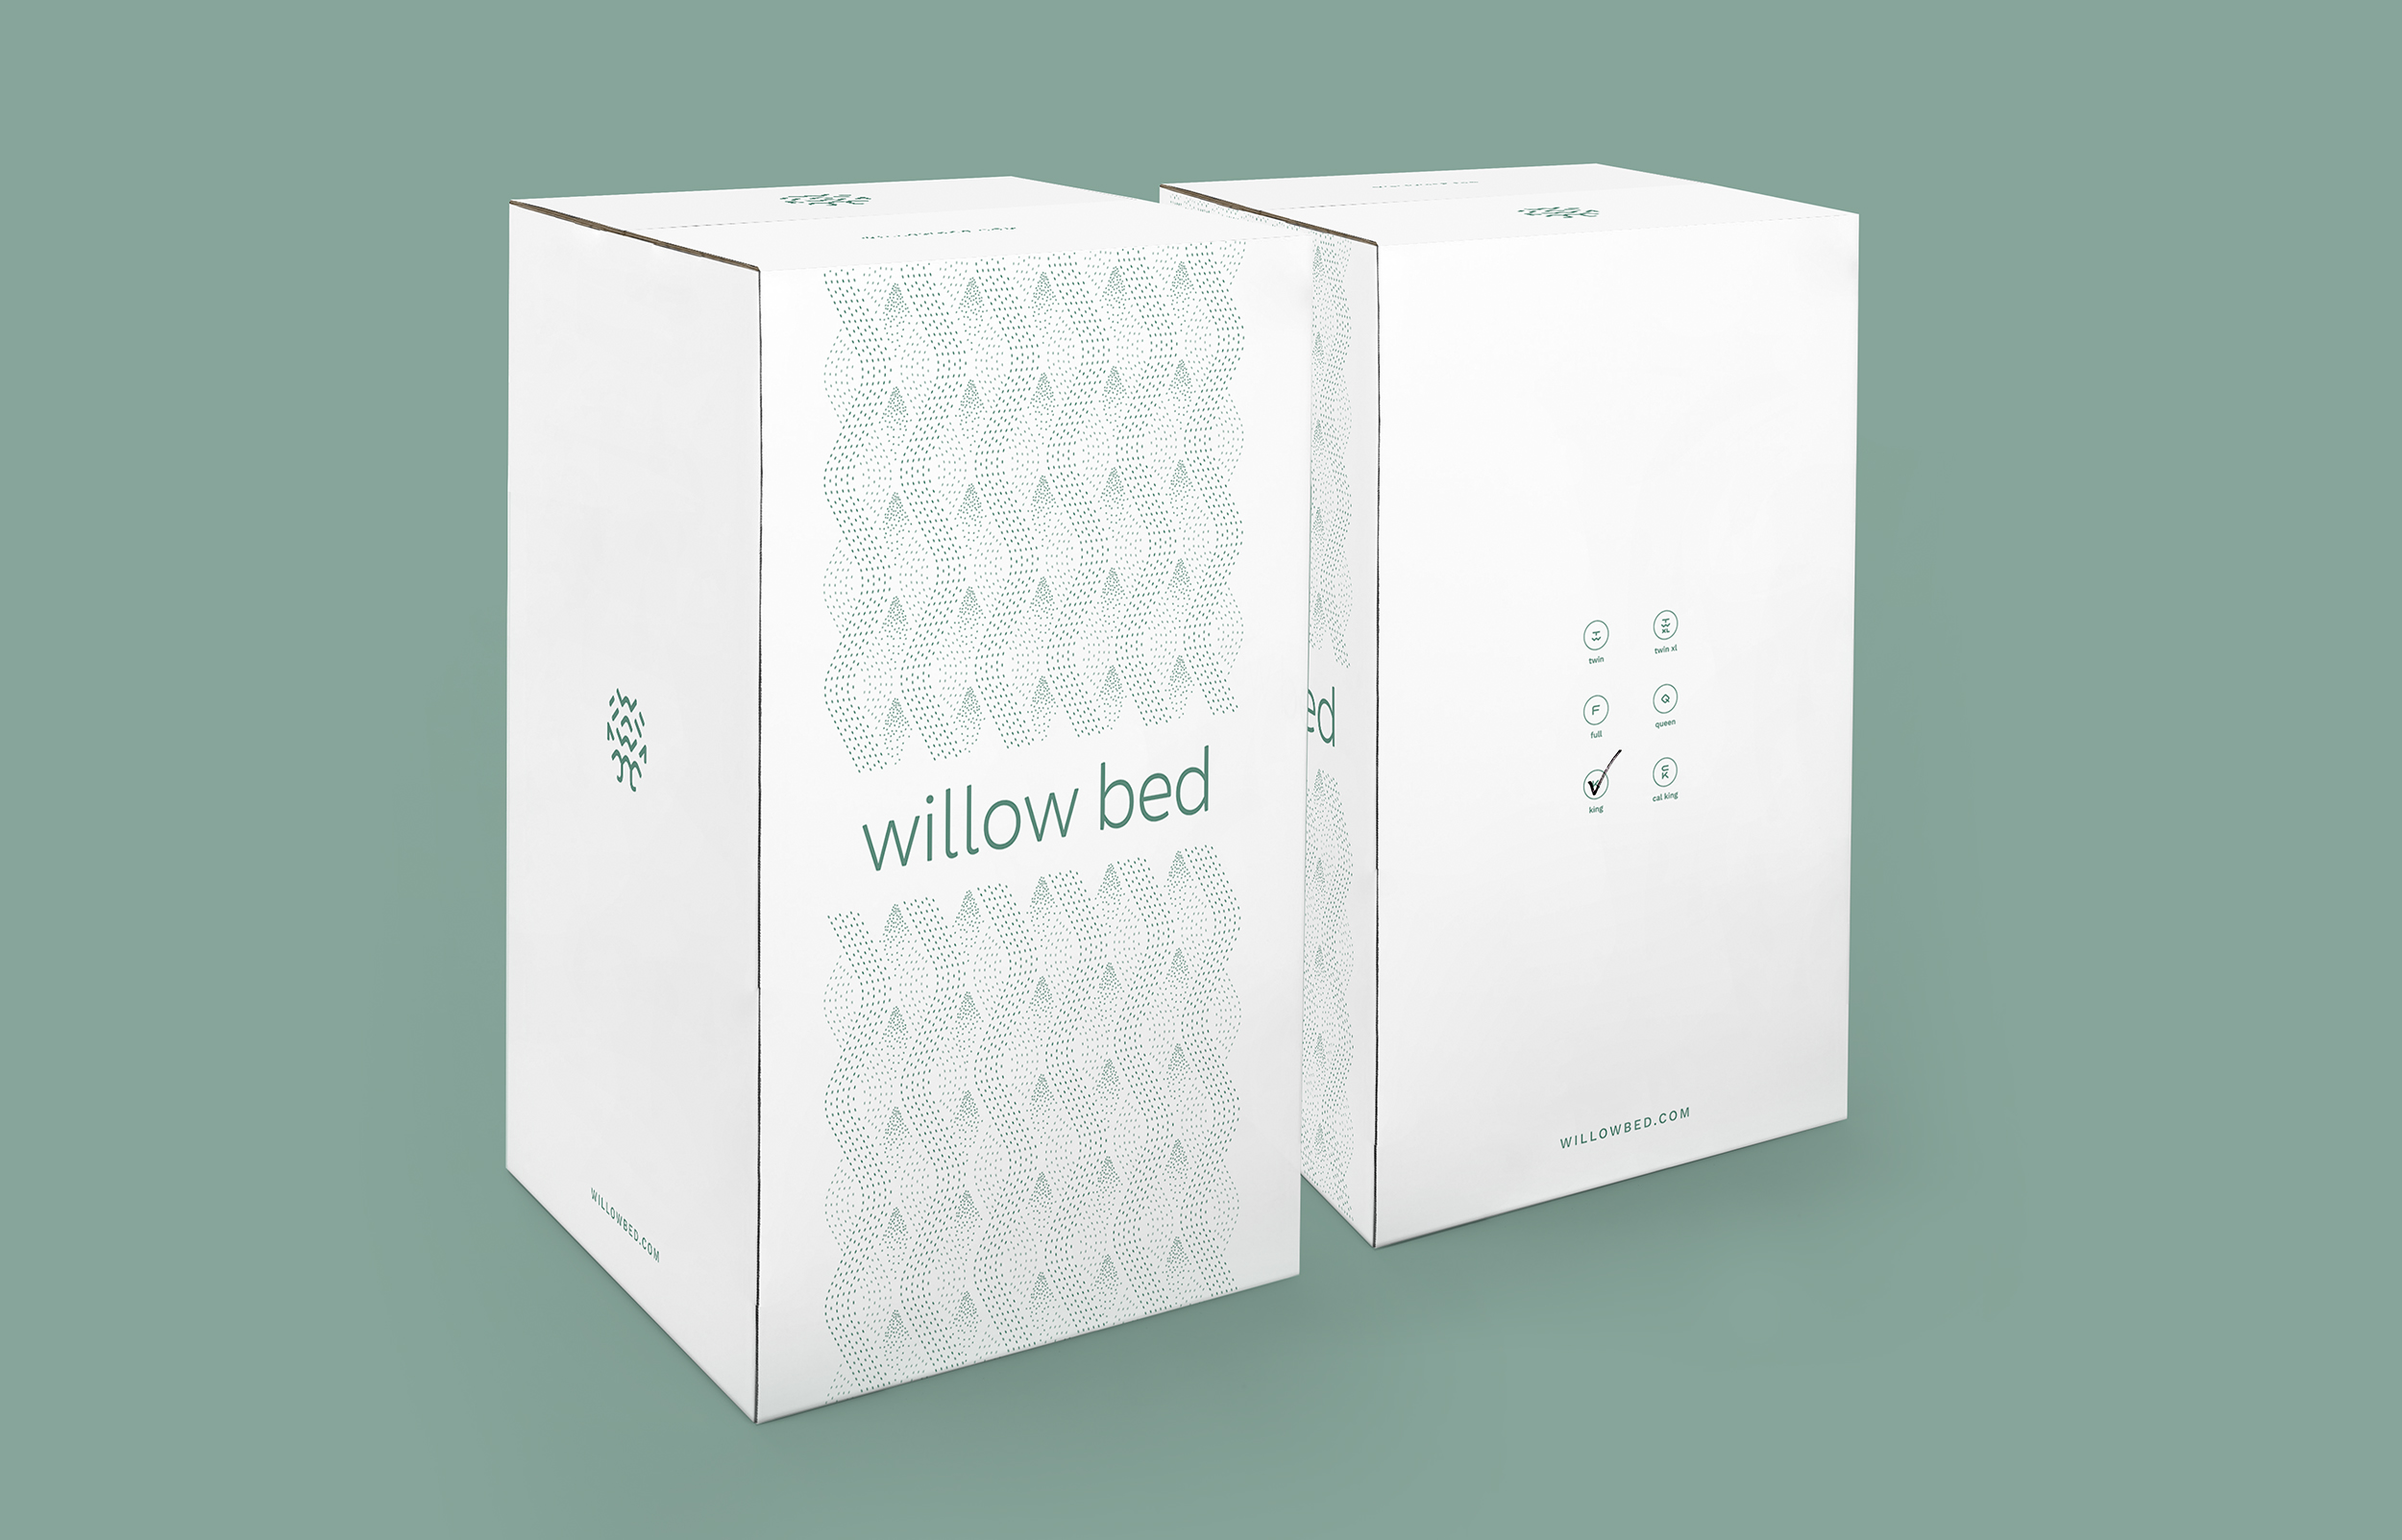 Mattress packaging front and back featuring logos and size identification icons for Willow Bed